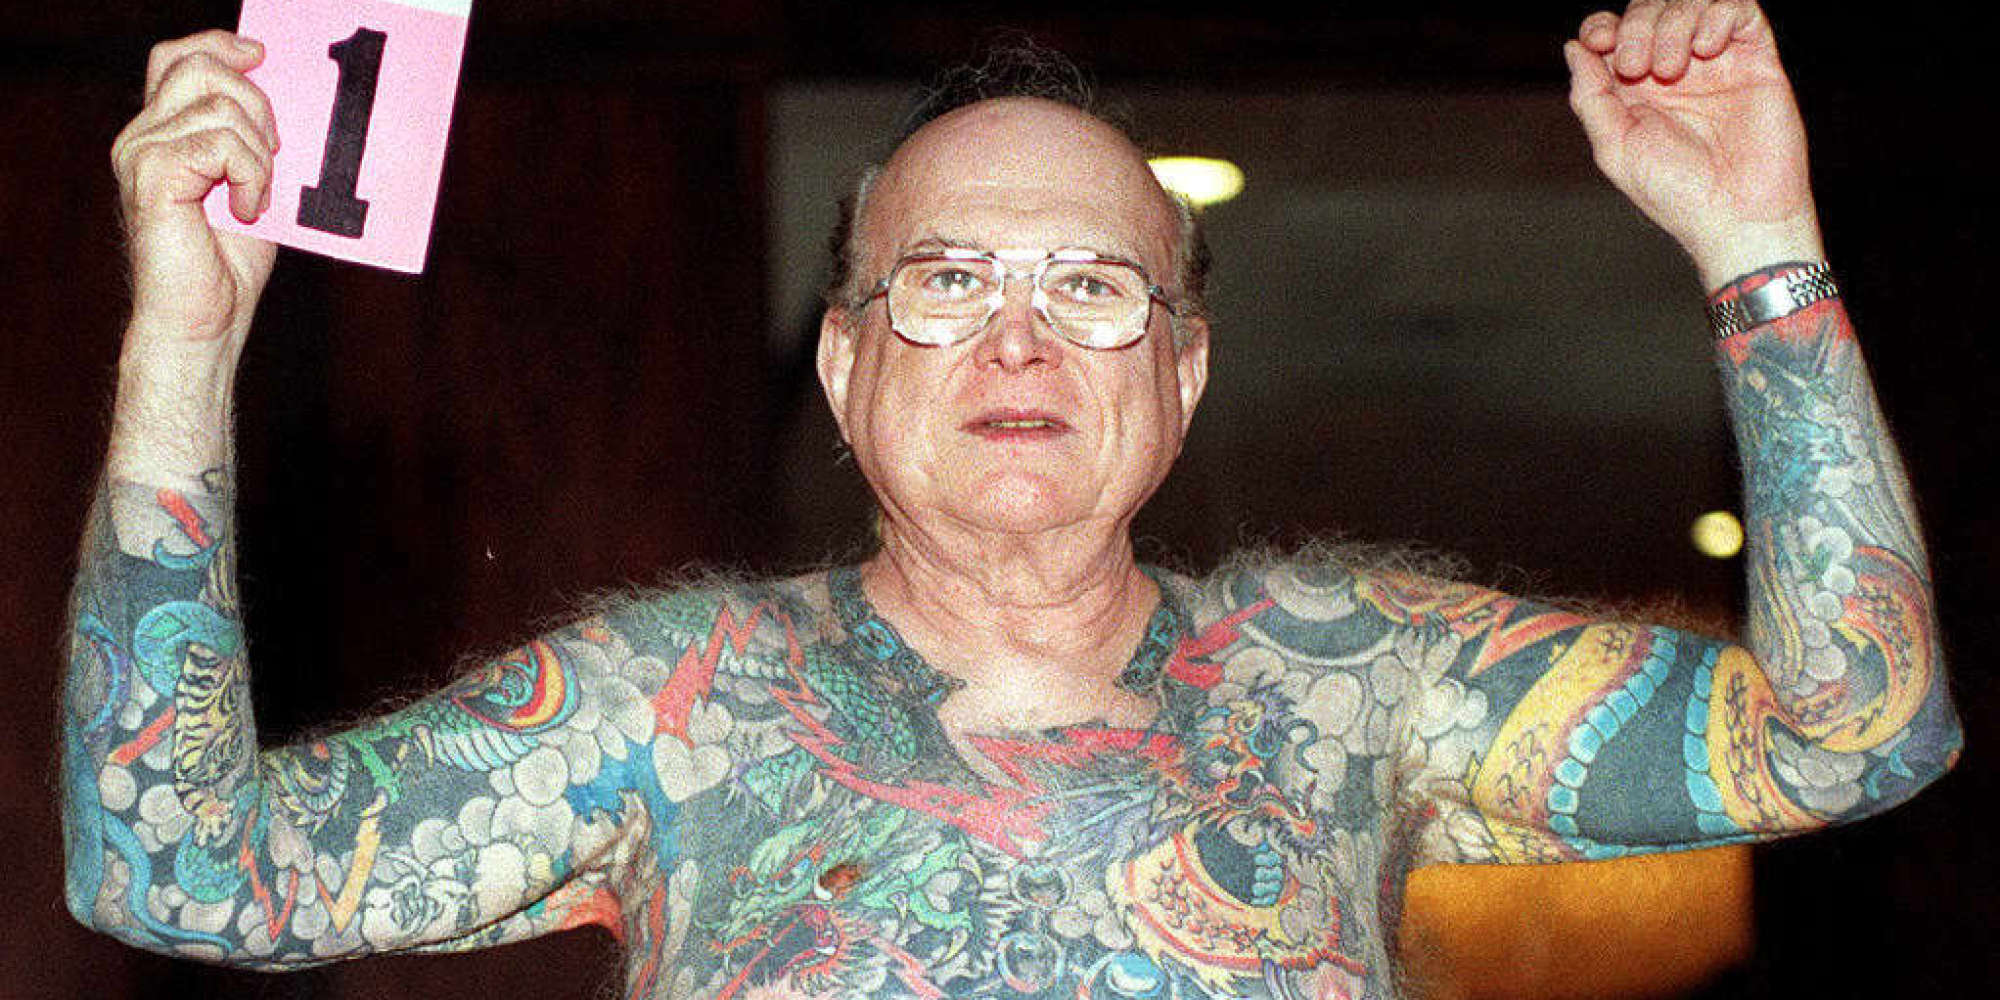 3. "Age-Appropriate Tattoos" - wide 9